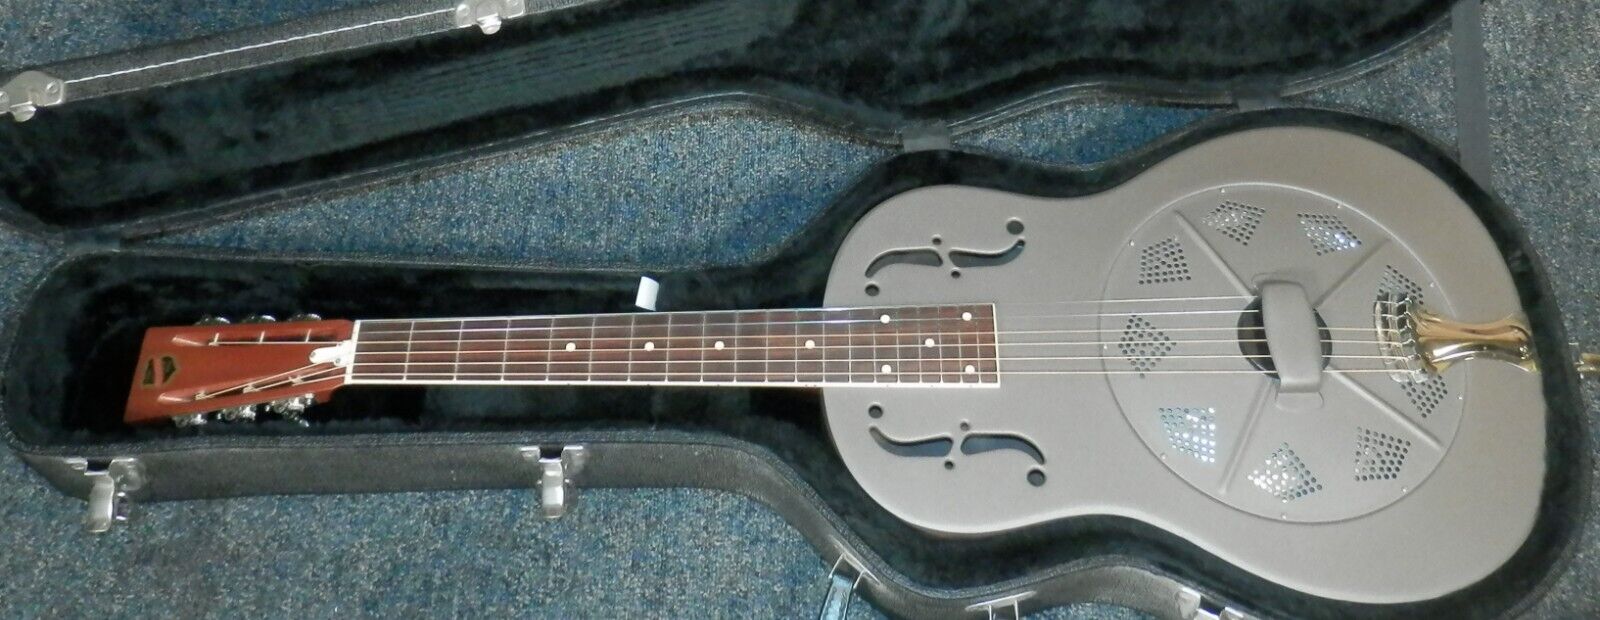 National Delphi Resonator Acoustic Guitar with case used Taupe Finish 2